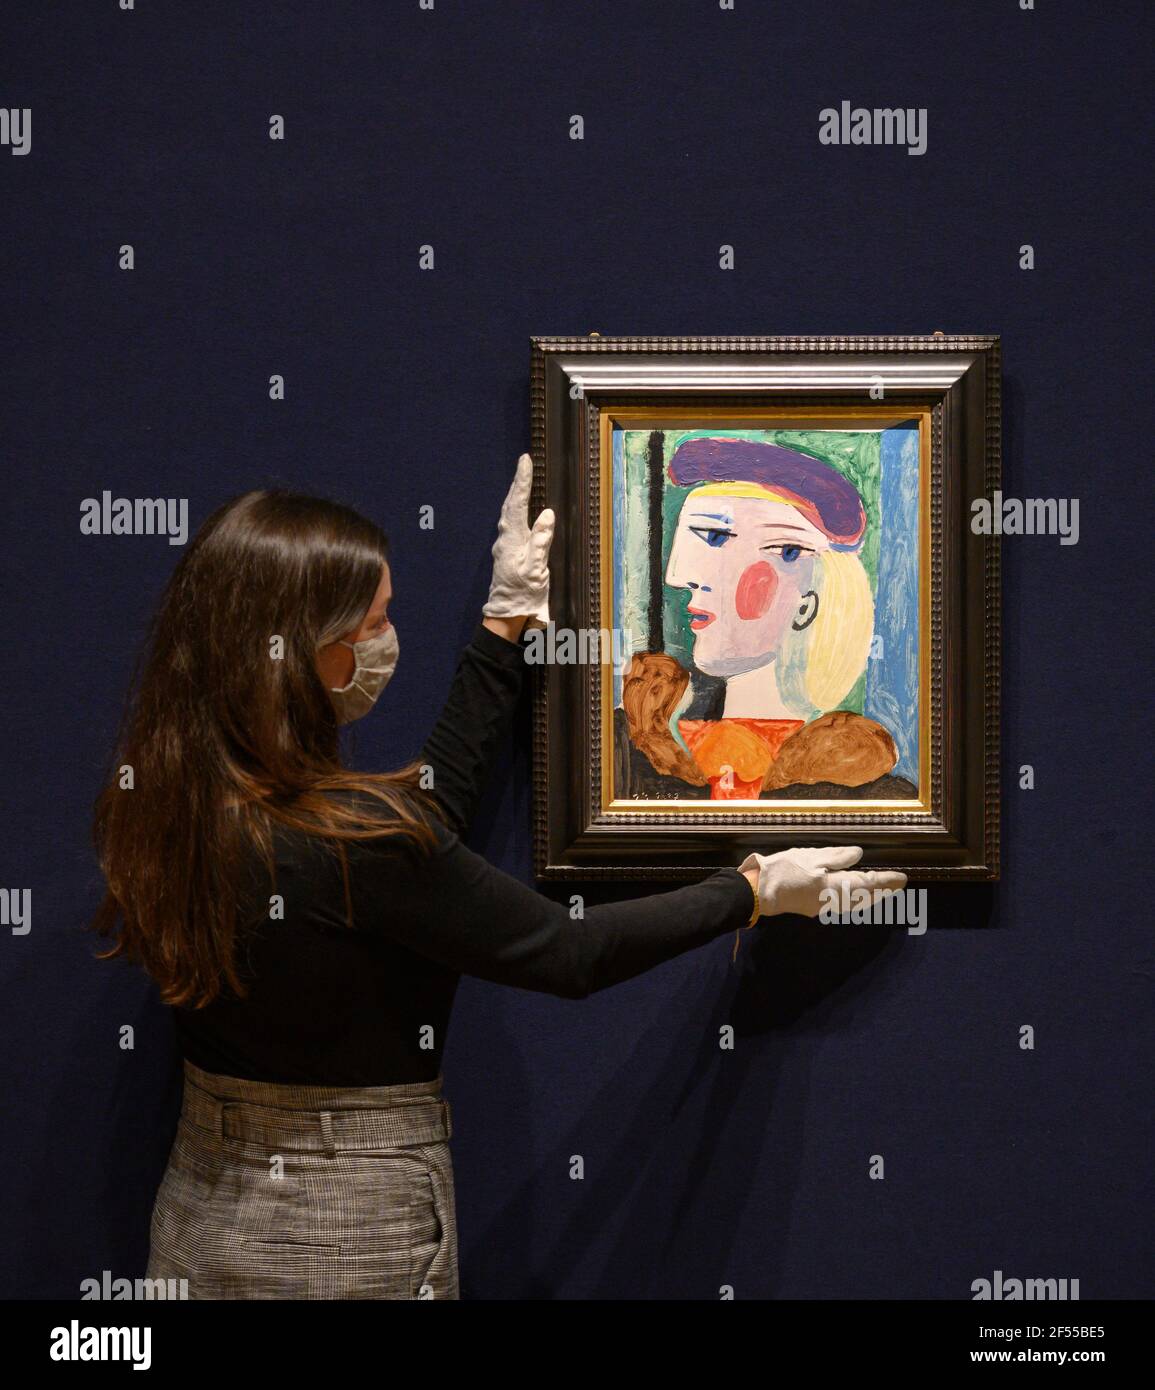 Bonhams, London, UK. 24 March 2021. A major Picasso portrait not seen for nearly 40 years, Femme au Béret Mauve, estimate $10,000,000-15,000,000, will be offered for sale at Bonhams Impressionist and Modern Art sale in New York on Thursday 13 May. Femme au Béret Mauve, painted in 1937, one of the artist’s most fruitful years during which he also produced Guernica. It is one of several depictions of Marie-Thérèse Walter painted at Le Tremblay-sur-Mauldre. Credit: Malcolm Park/Alamy Stock Photo